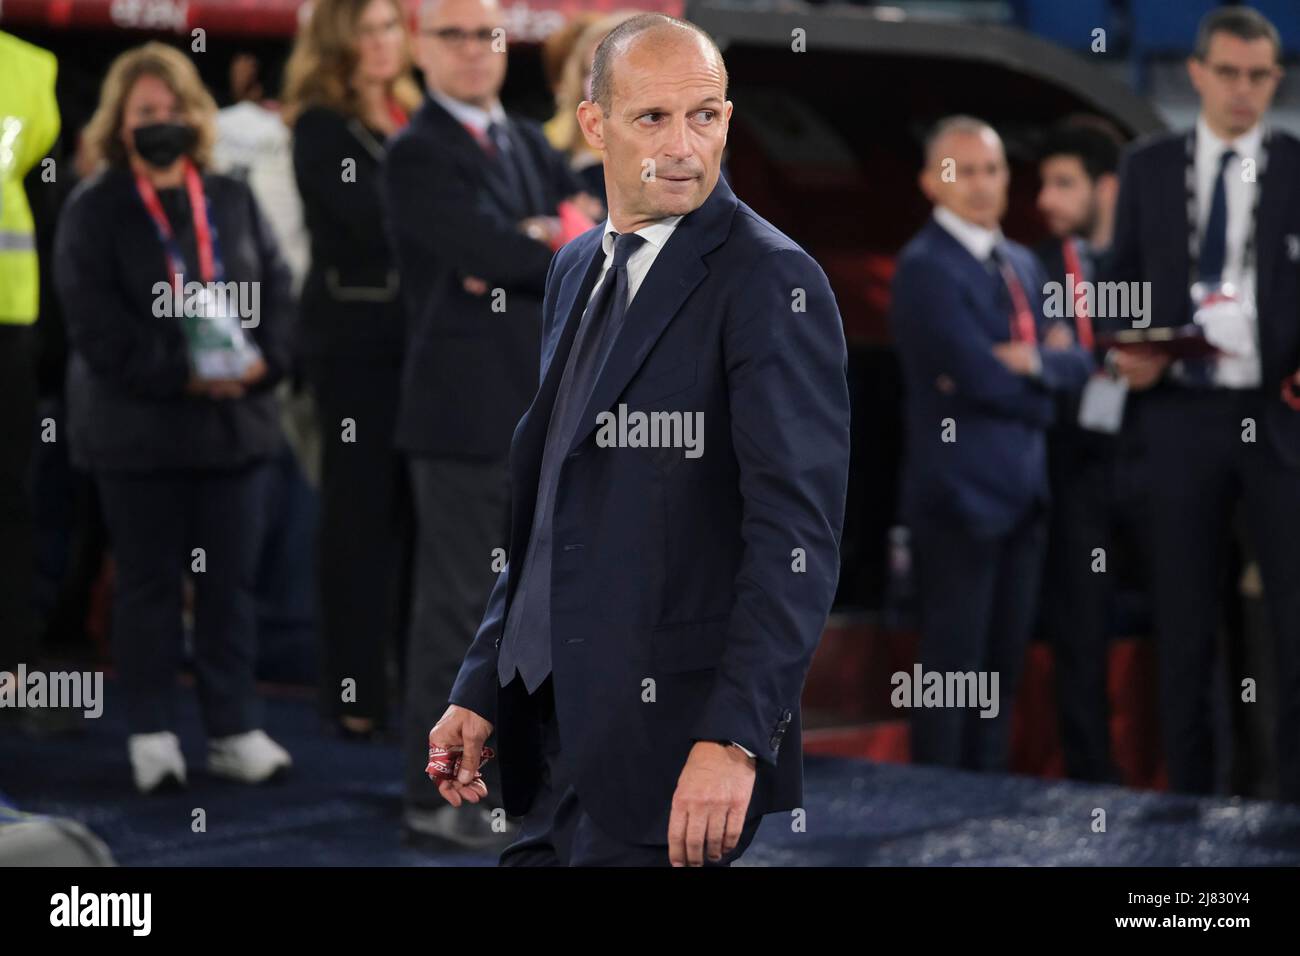 during the Coppa Italia final between Juventus Vs Inter at the Olimpico Stadium Rome, centre Italy, on May 11, 2022. Stock Photo